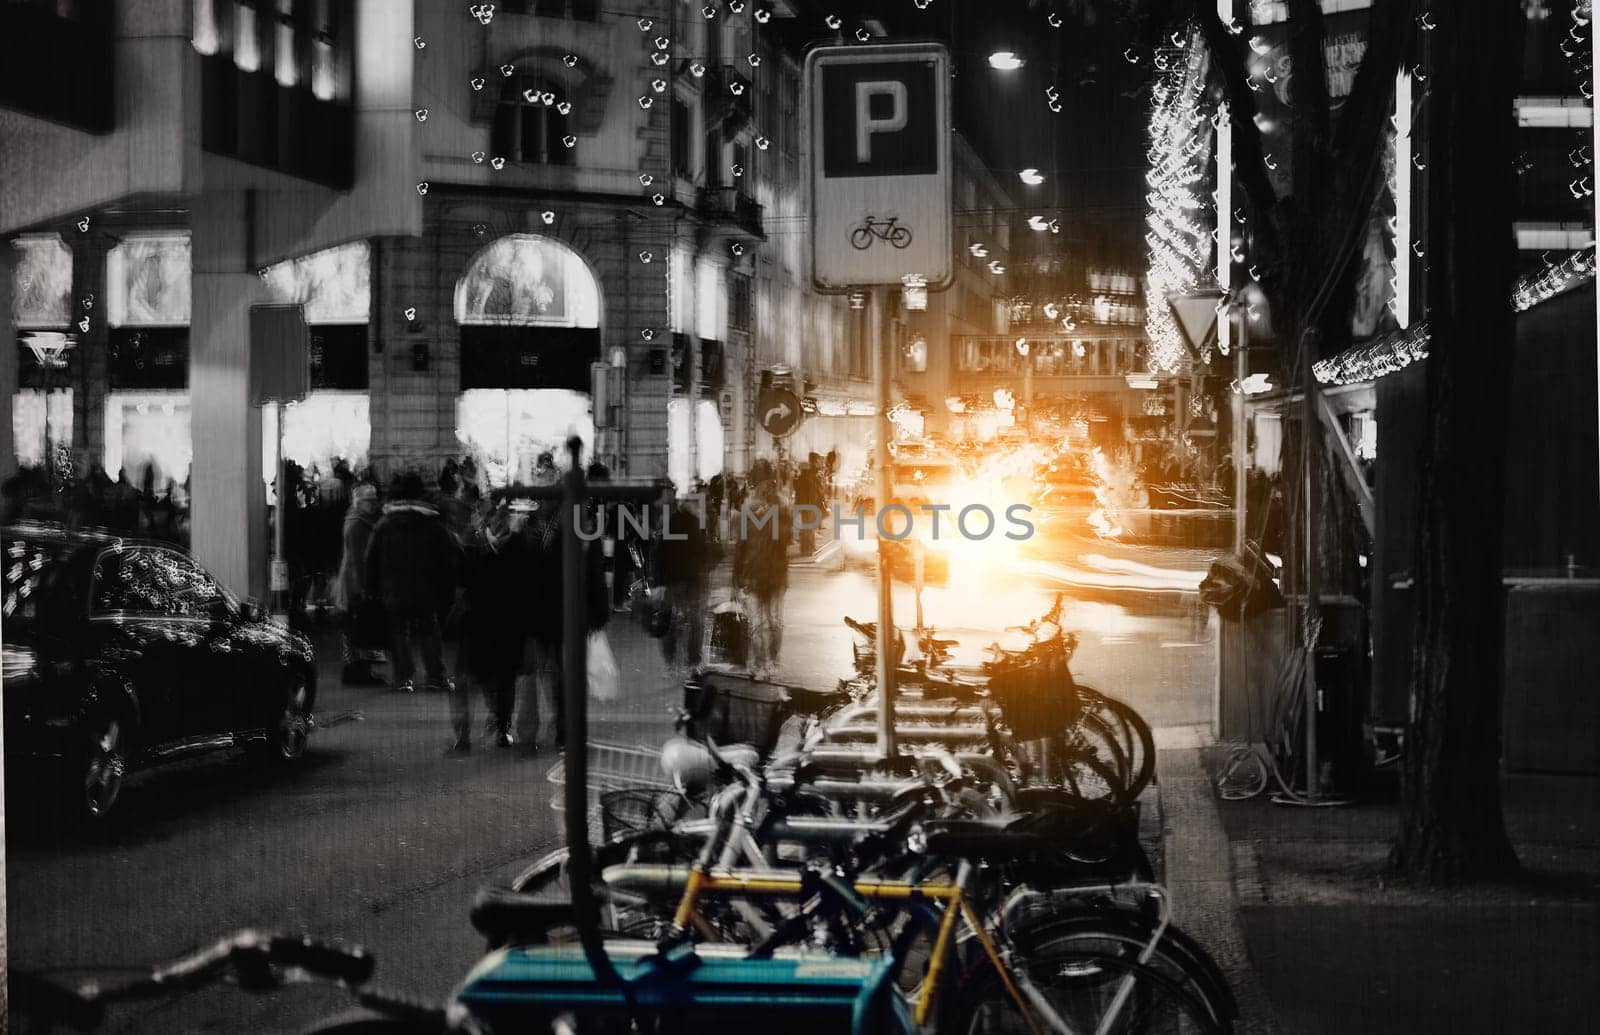 Urban town, black and white with city street and buildings with New York and travelling. Metro, outdoor and flare with monochrome and nightlife with transportation and people with road and bike.